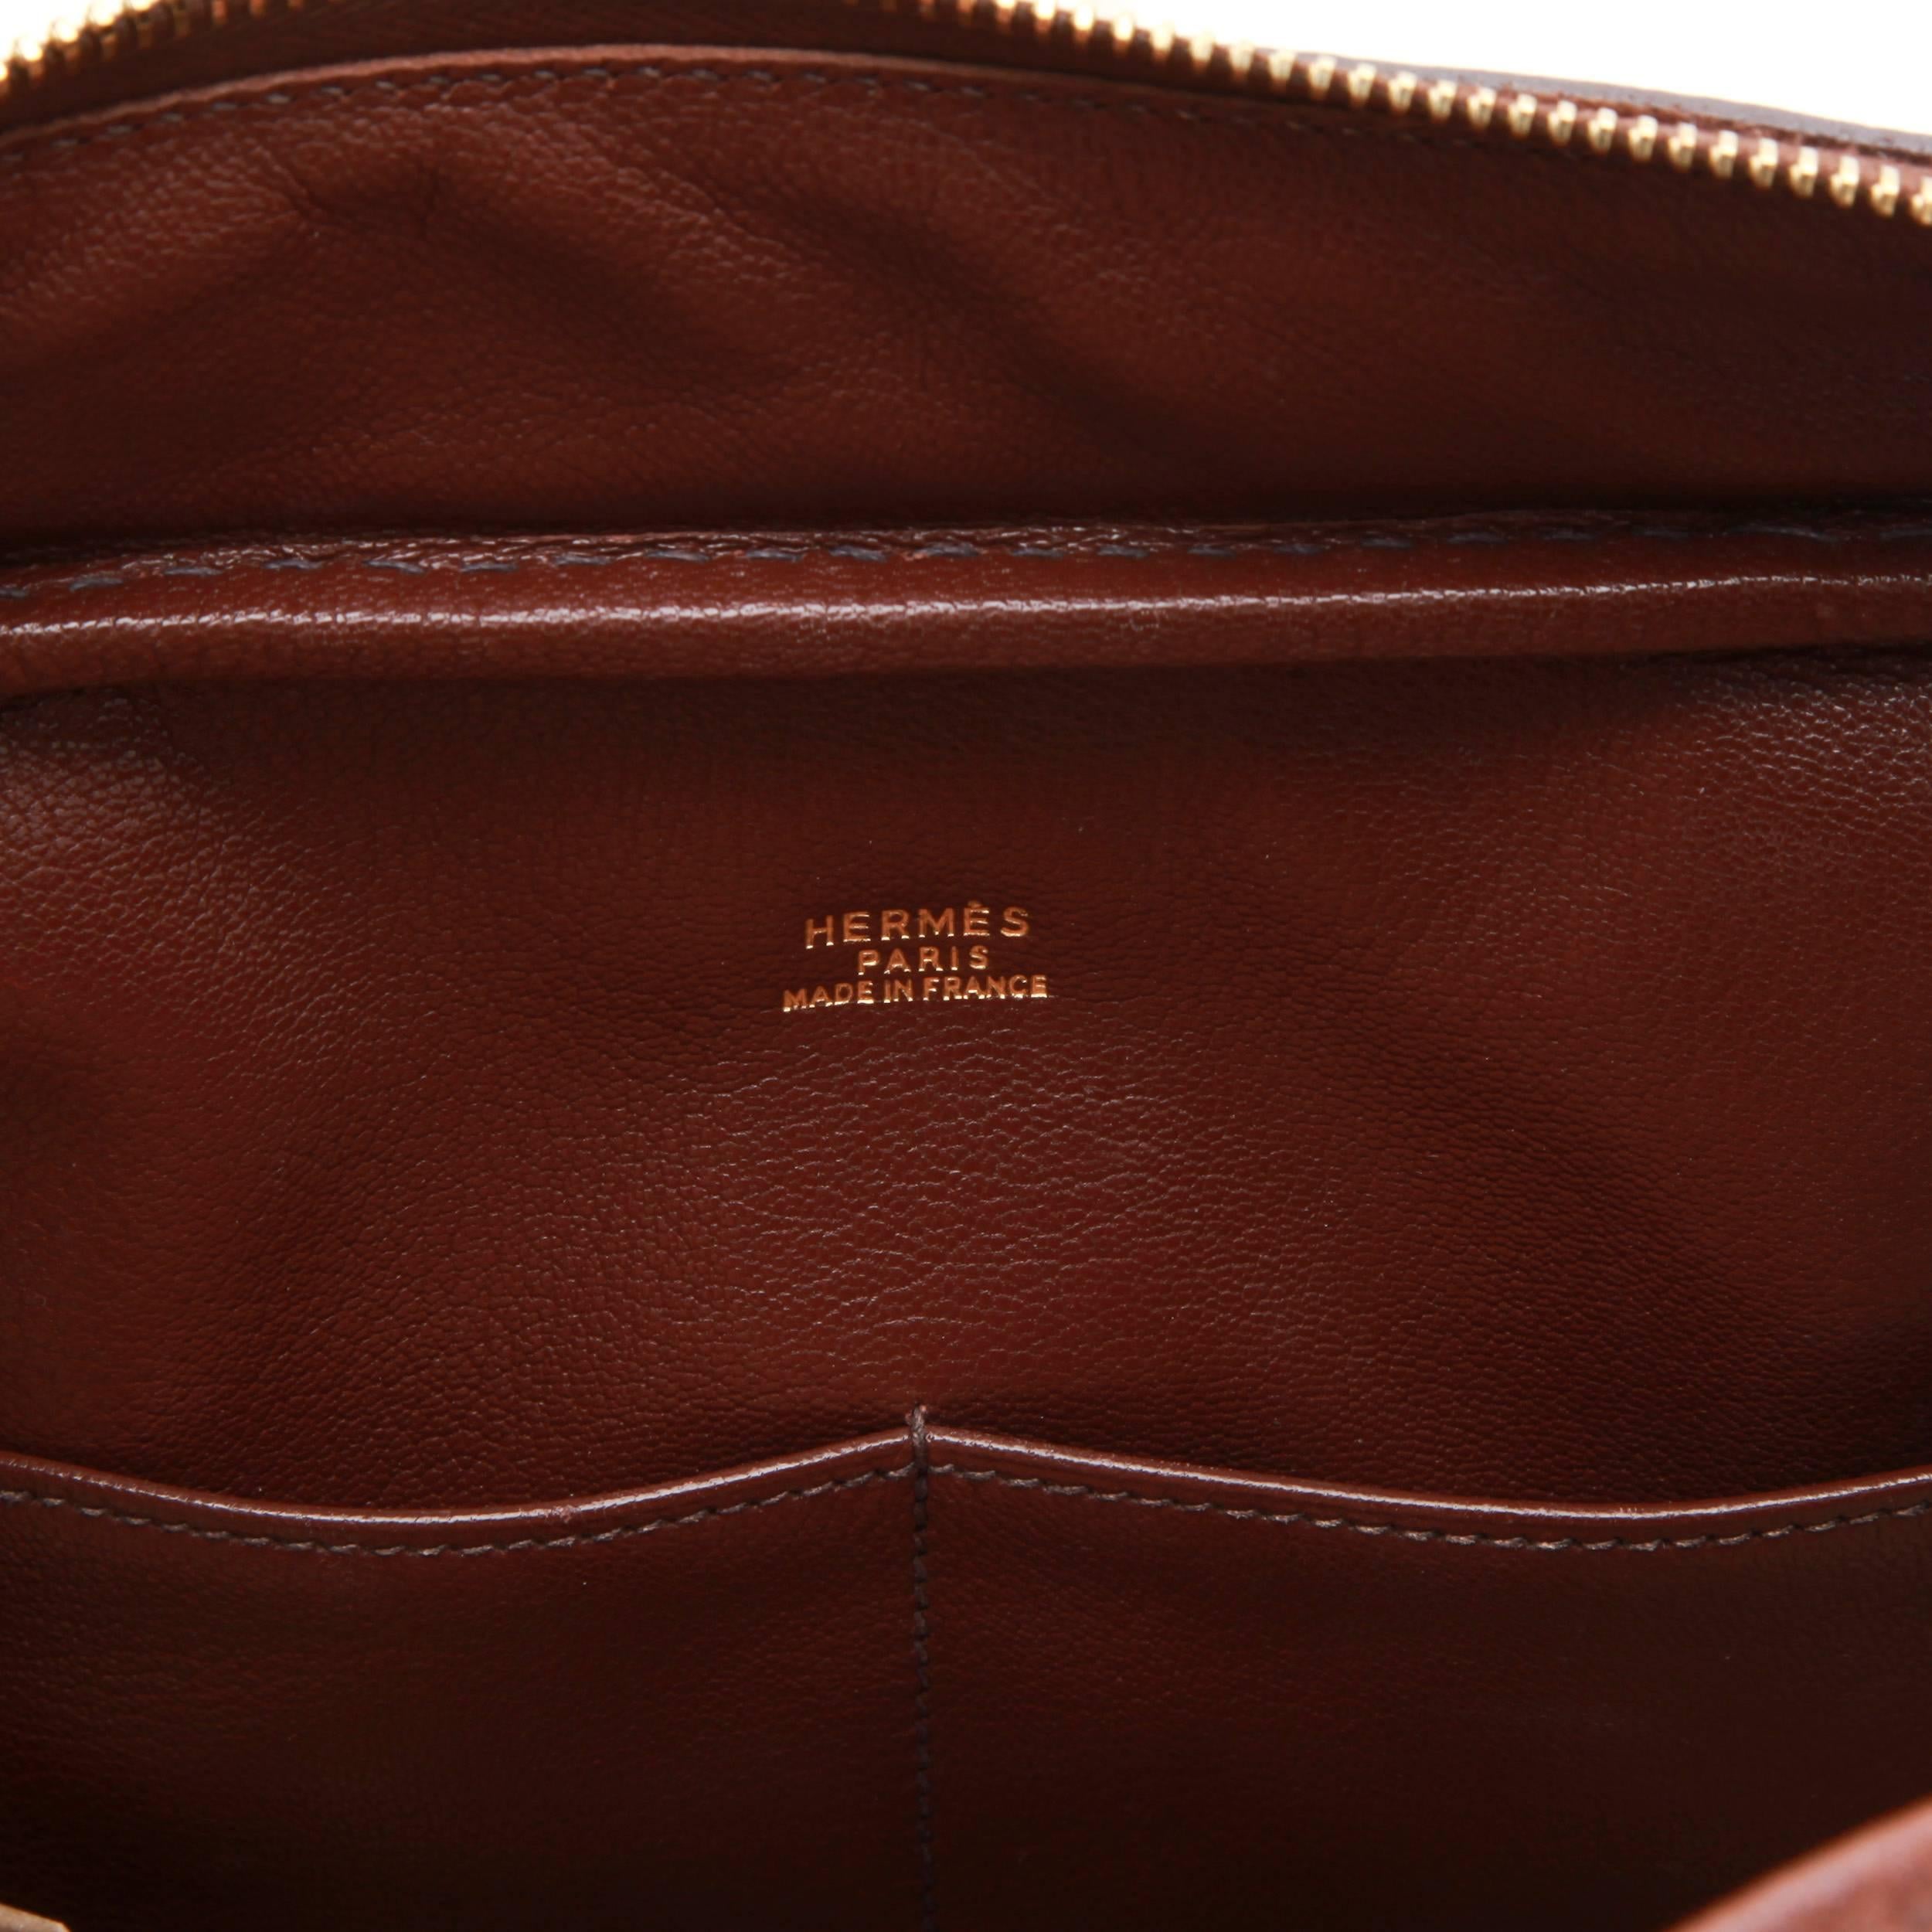 HERMES 'plume' Bag in Brown Grained Leather 3